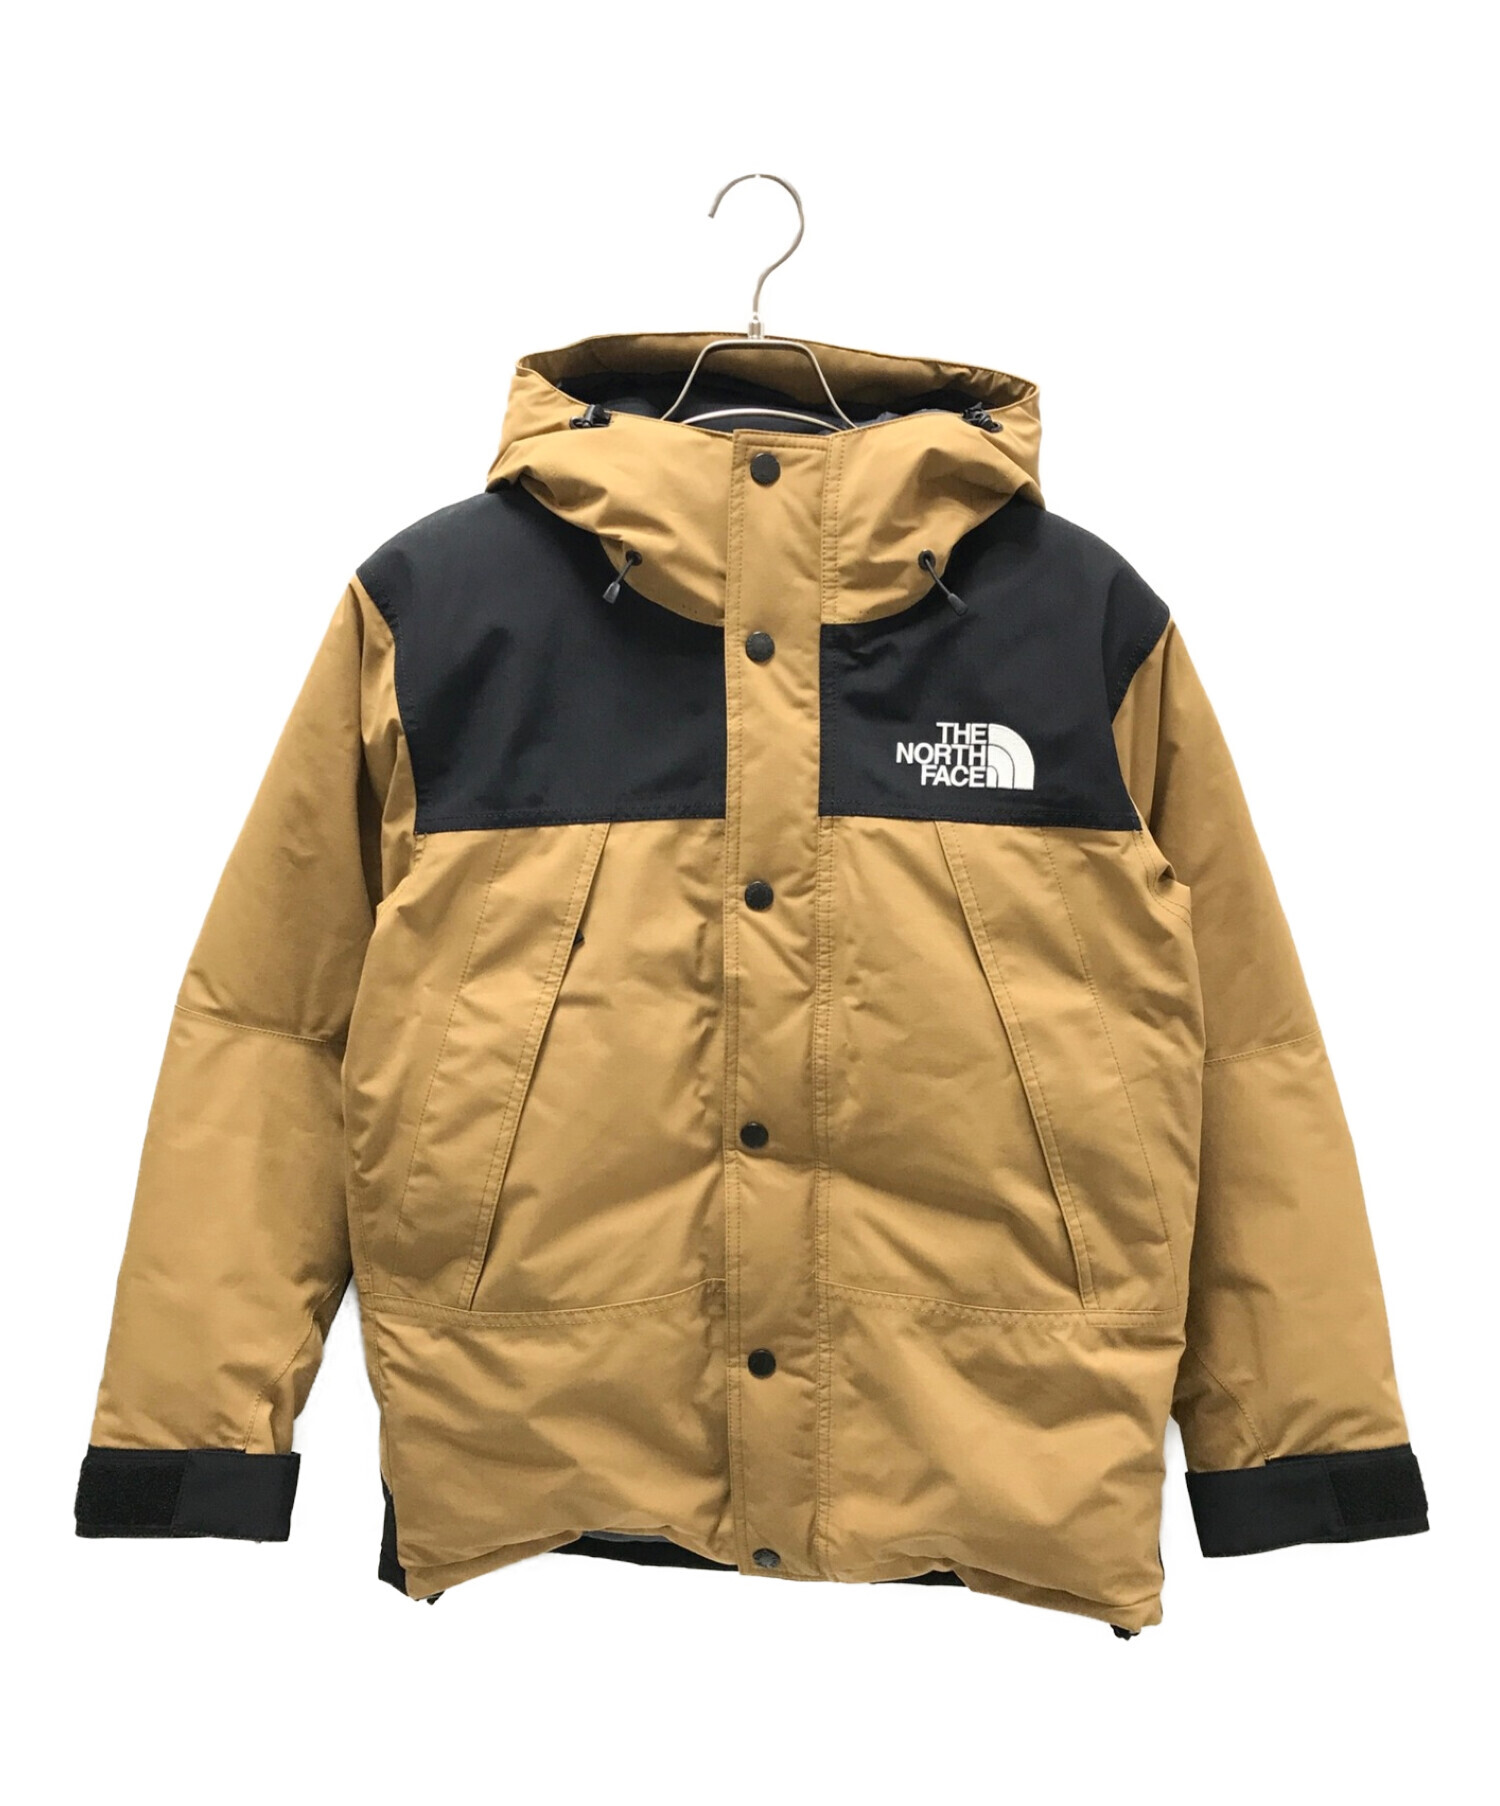 THE NORTH FACE MOUNTAIN BK S